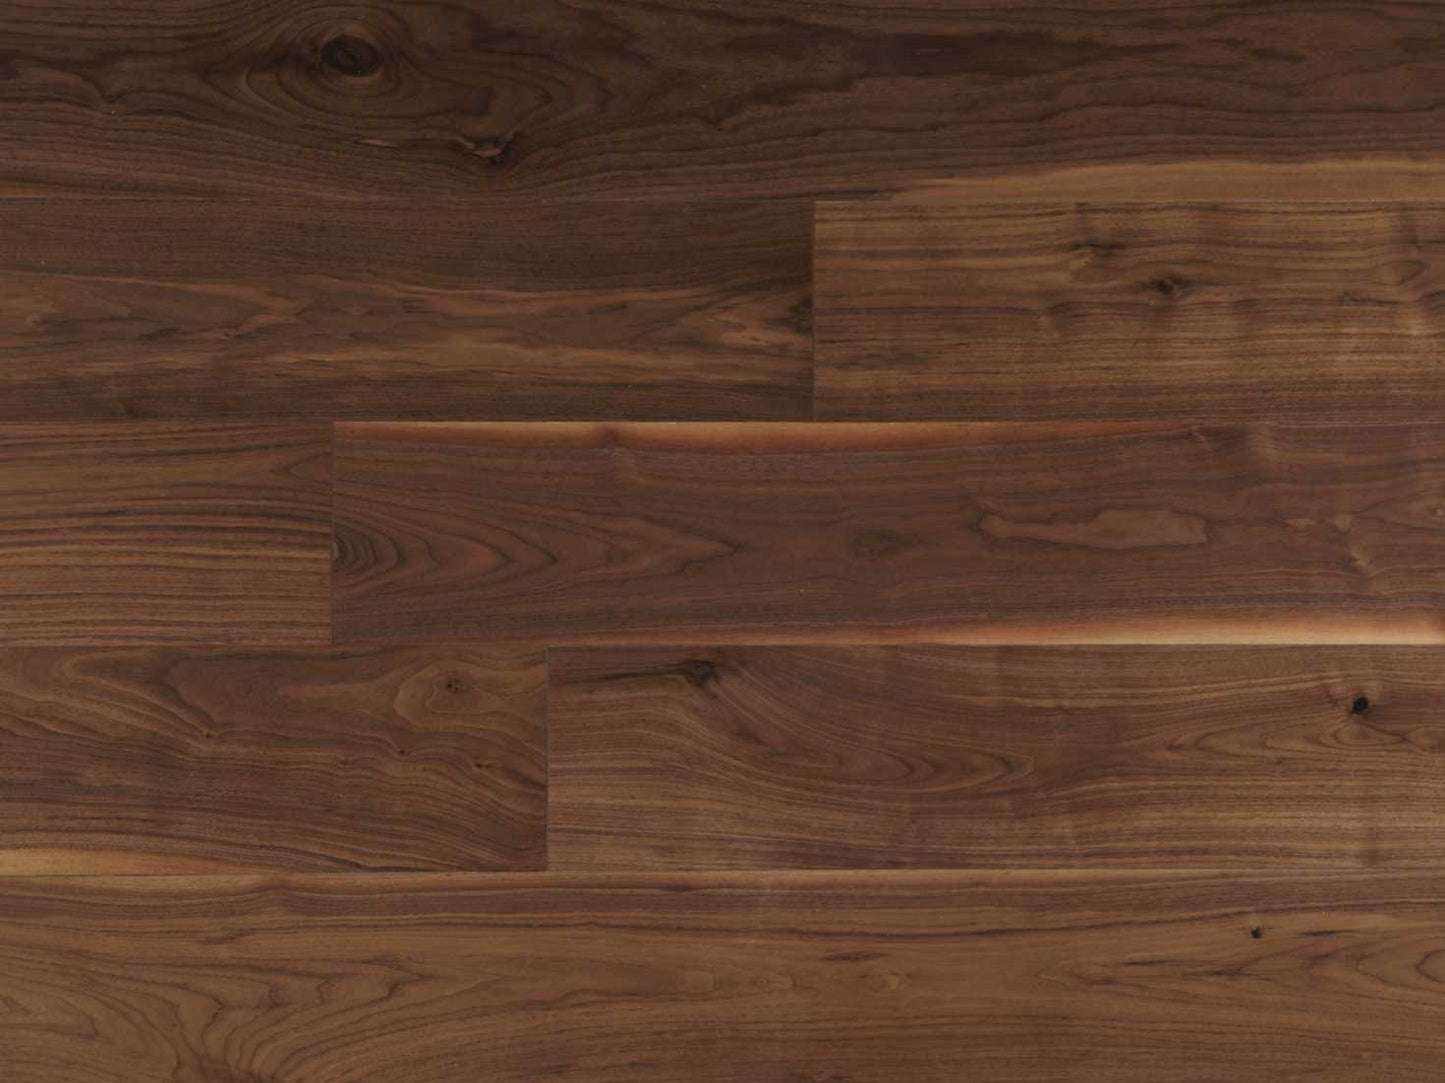 American Black Walnut color natural 6 x ¾ x in nail